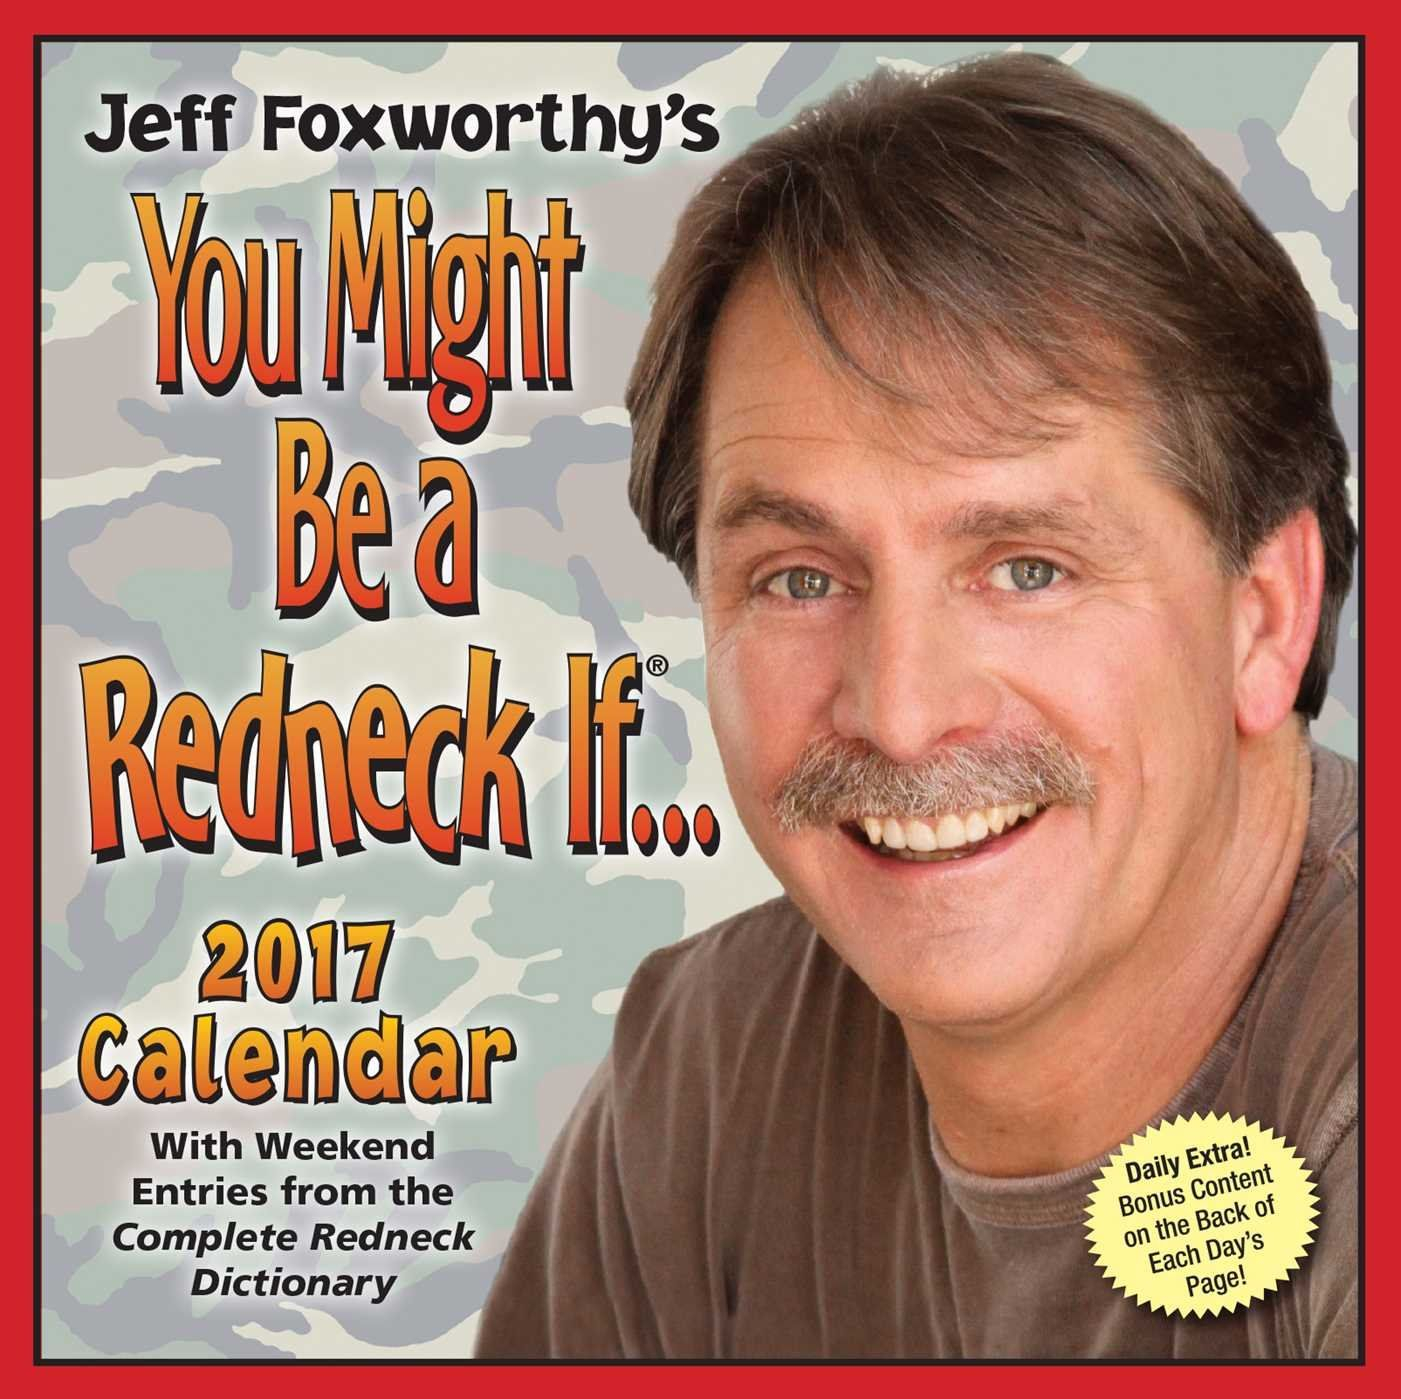 Top 10 Best Funny Day to Day Calendars 2020 With Images Jeff Foxworthy